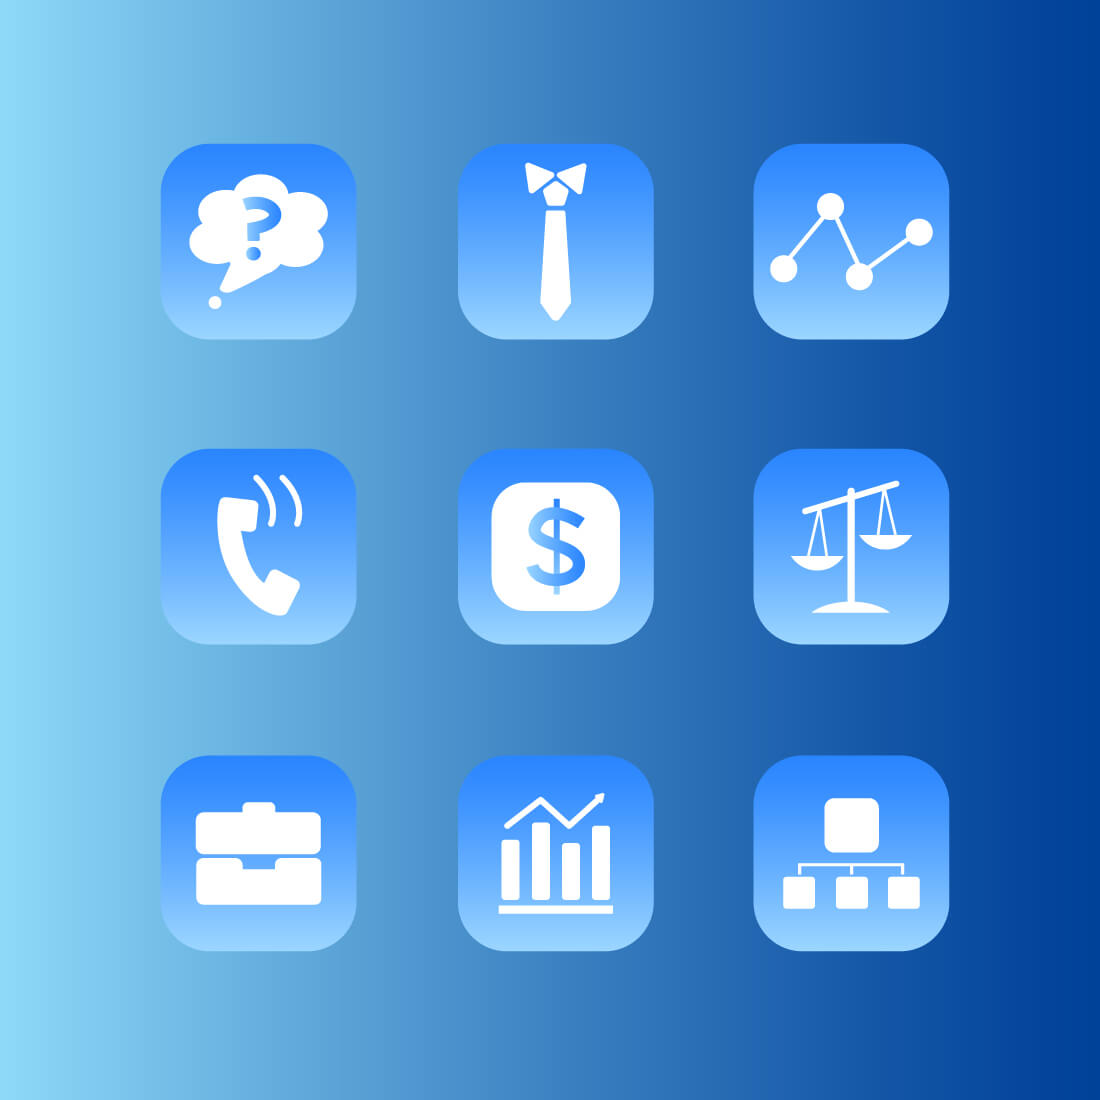 Free Business Icons cover image.